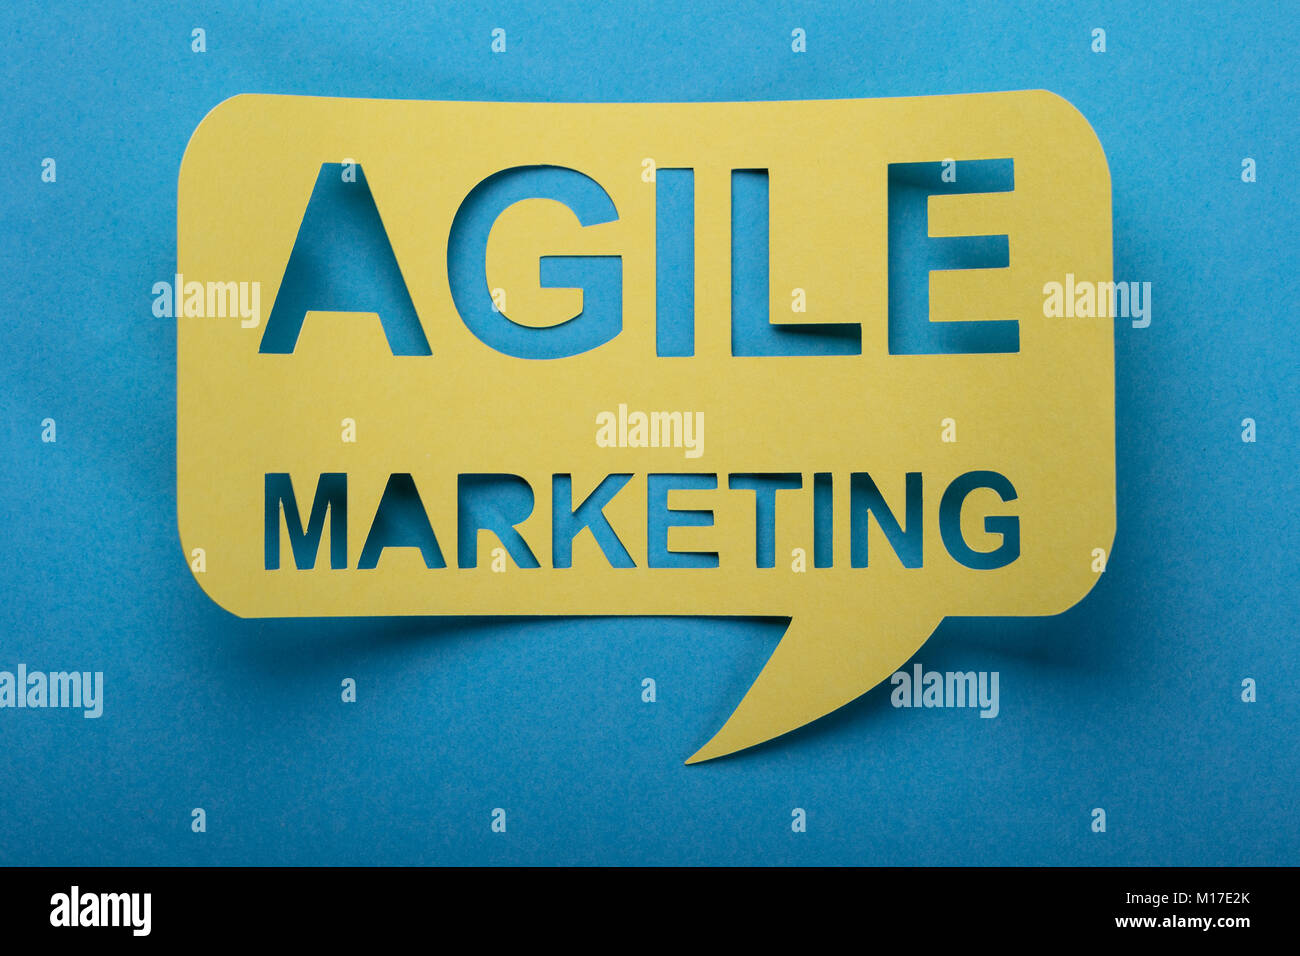 Agile Marketing Words Cut Out On Speech Bubble Over Blue Background Stock Photo